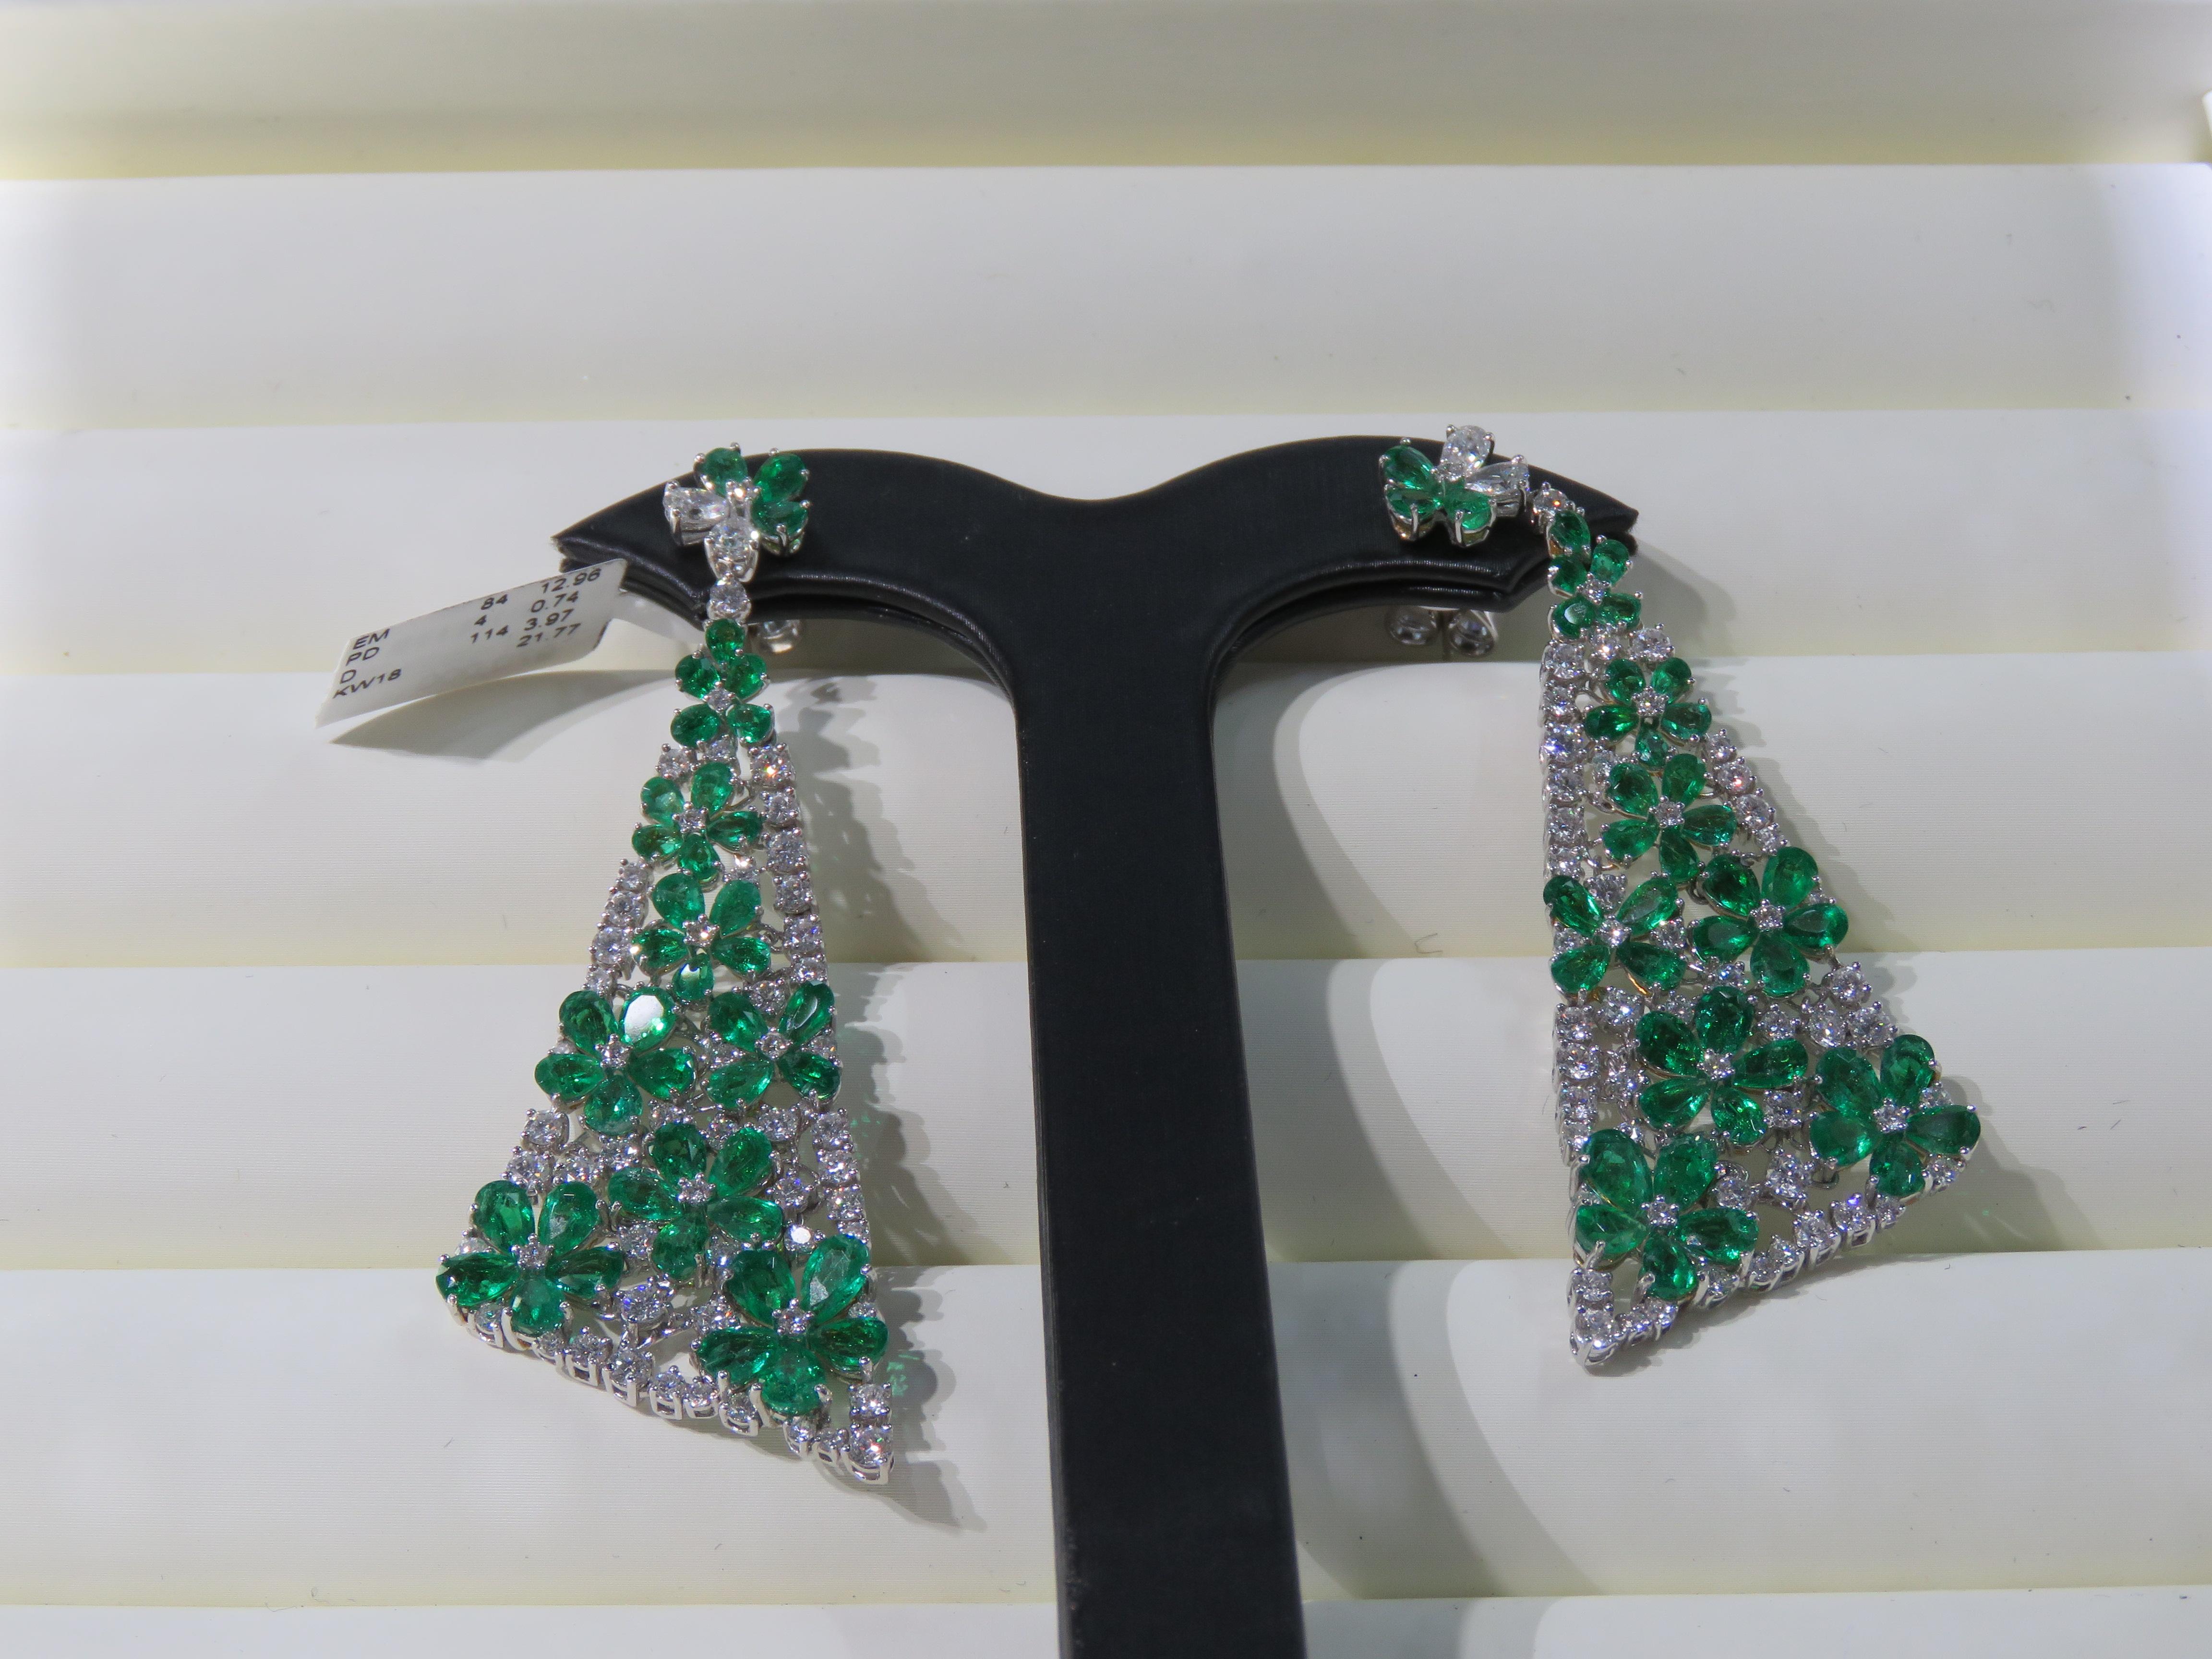 The Following Item we are offering is this Rare Important Radiant 18KT Gold Gorgeous Glittering and Sparkling Magnificent Fancy Colombian Emerald and Diamond Dangle Earrings. Earrings Contains approx 18CTS of Beautiful Fancy Cut Colombian Emeralds